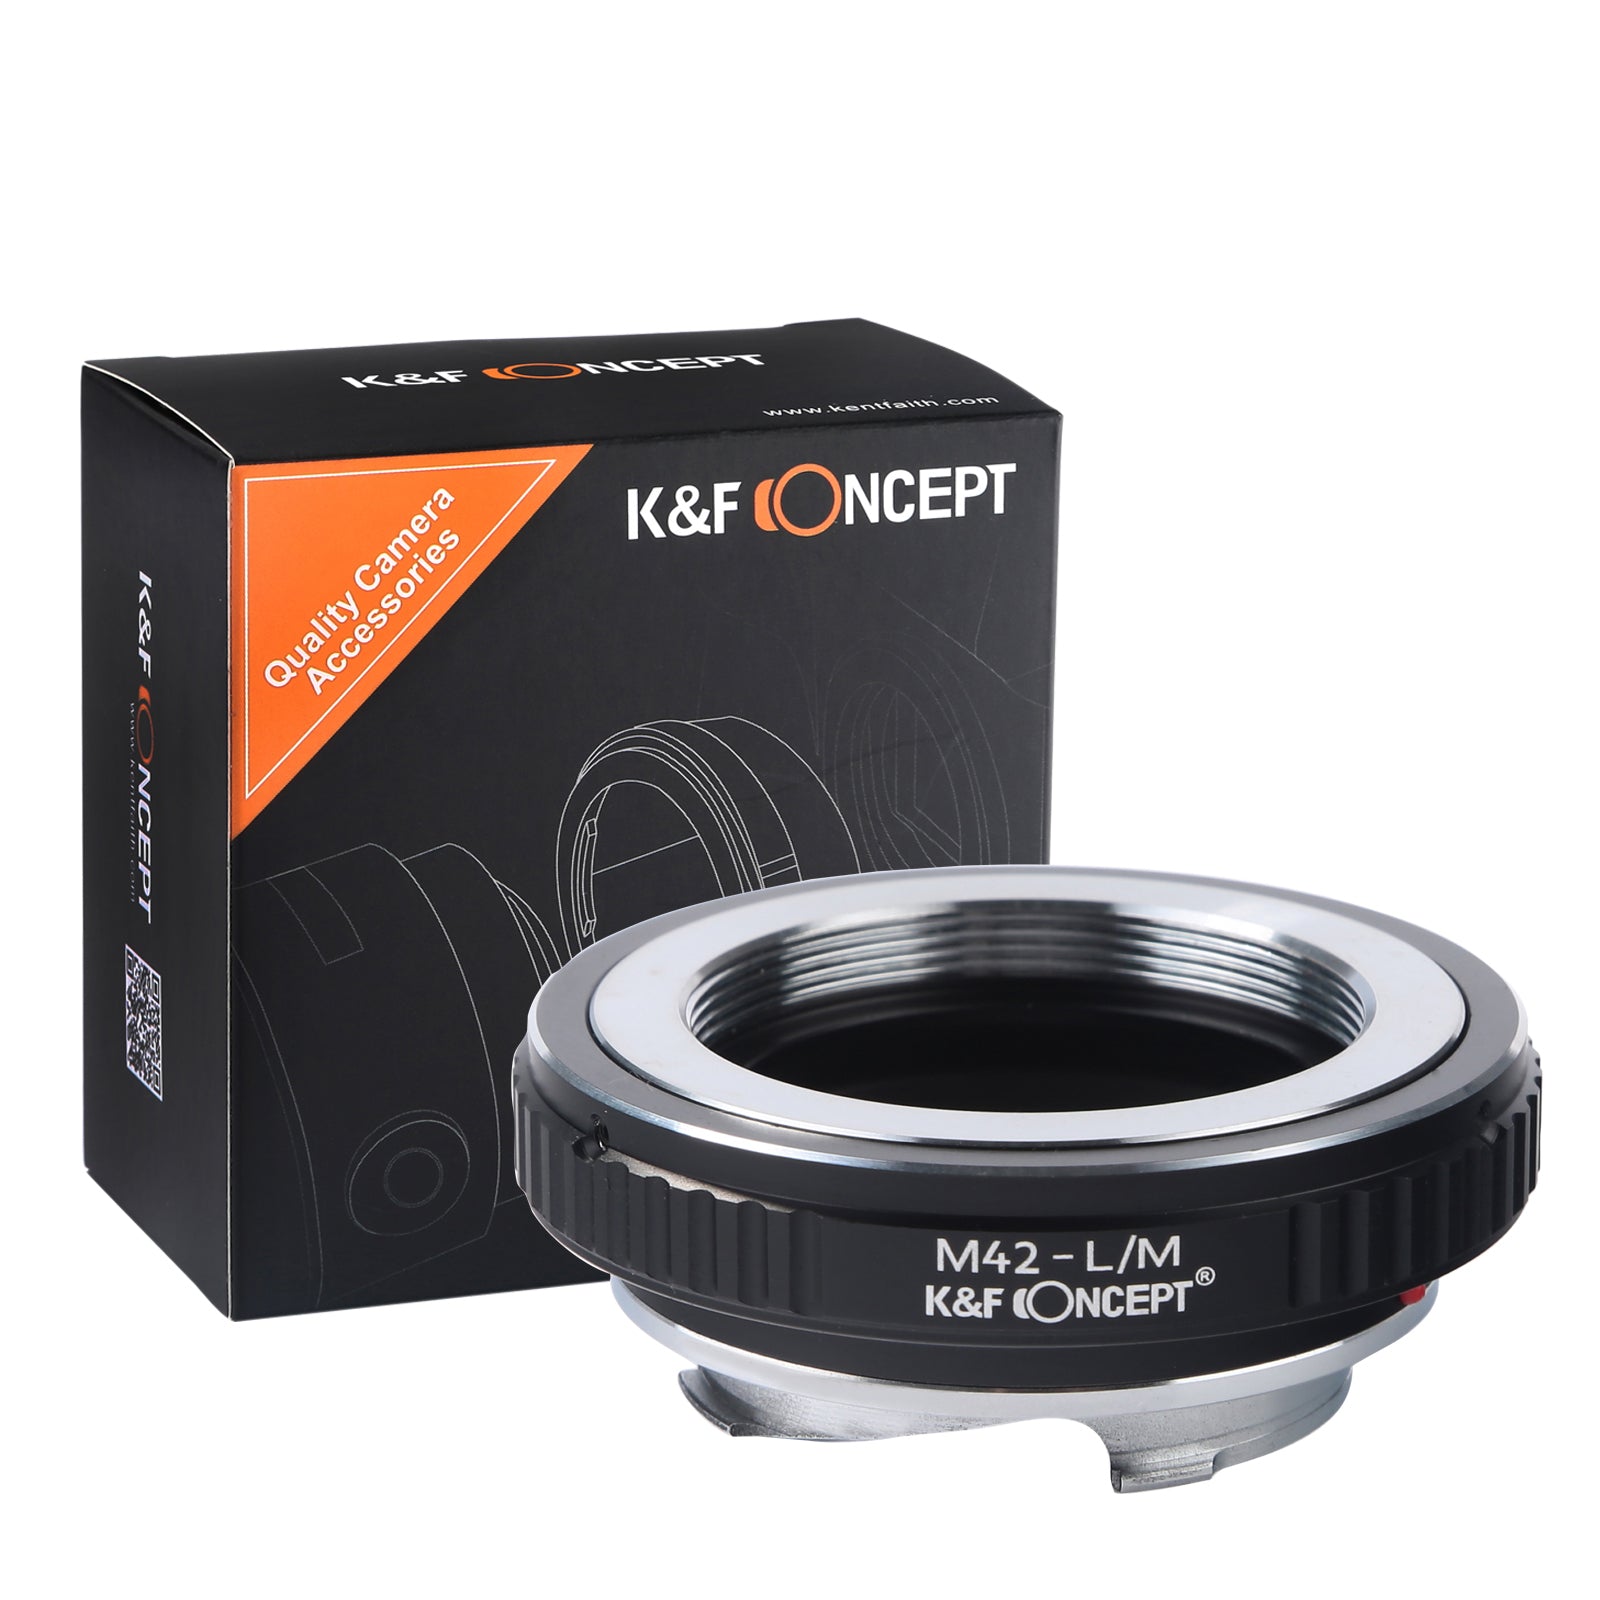 K&F CONCEPT M42-LM Leica M Lens mount adapter